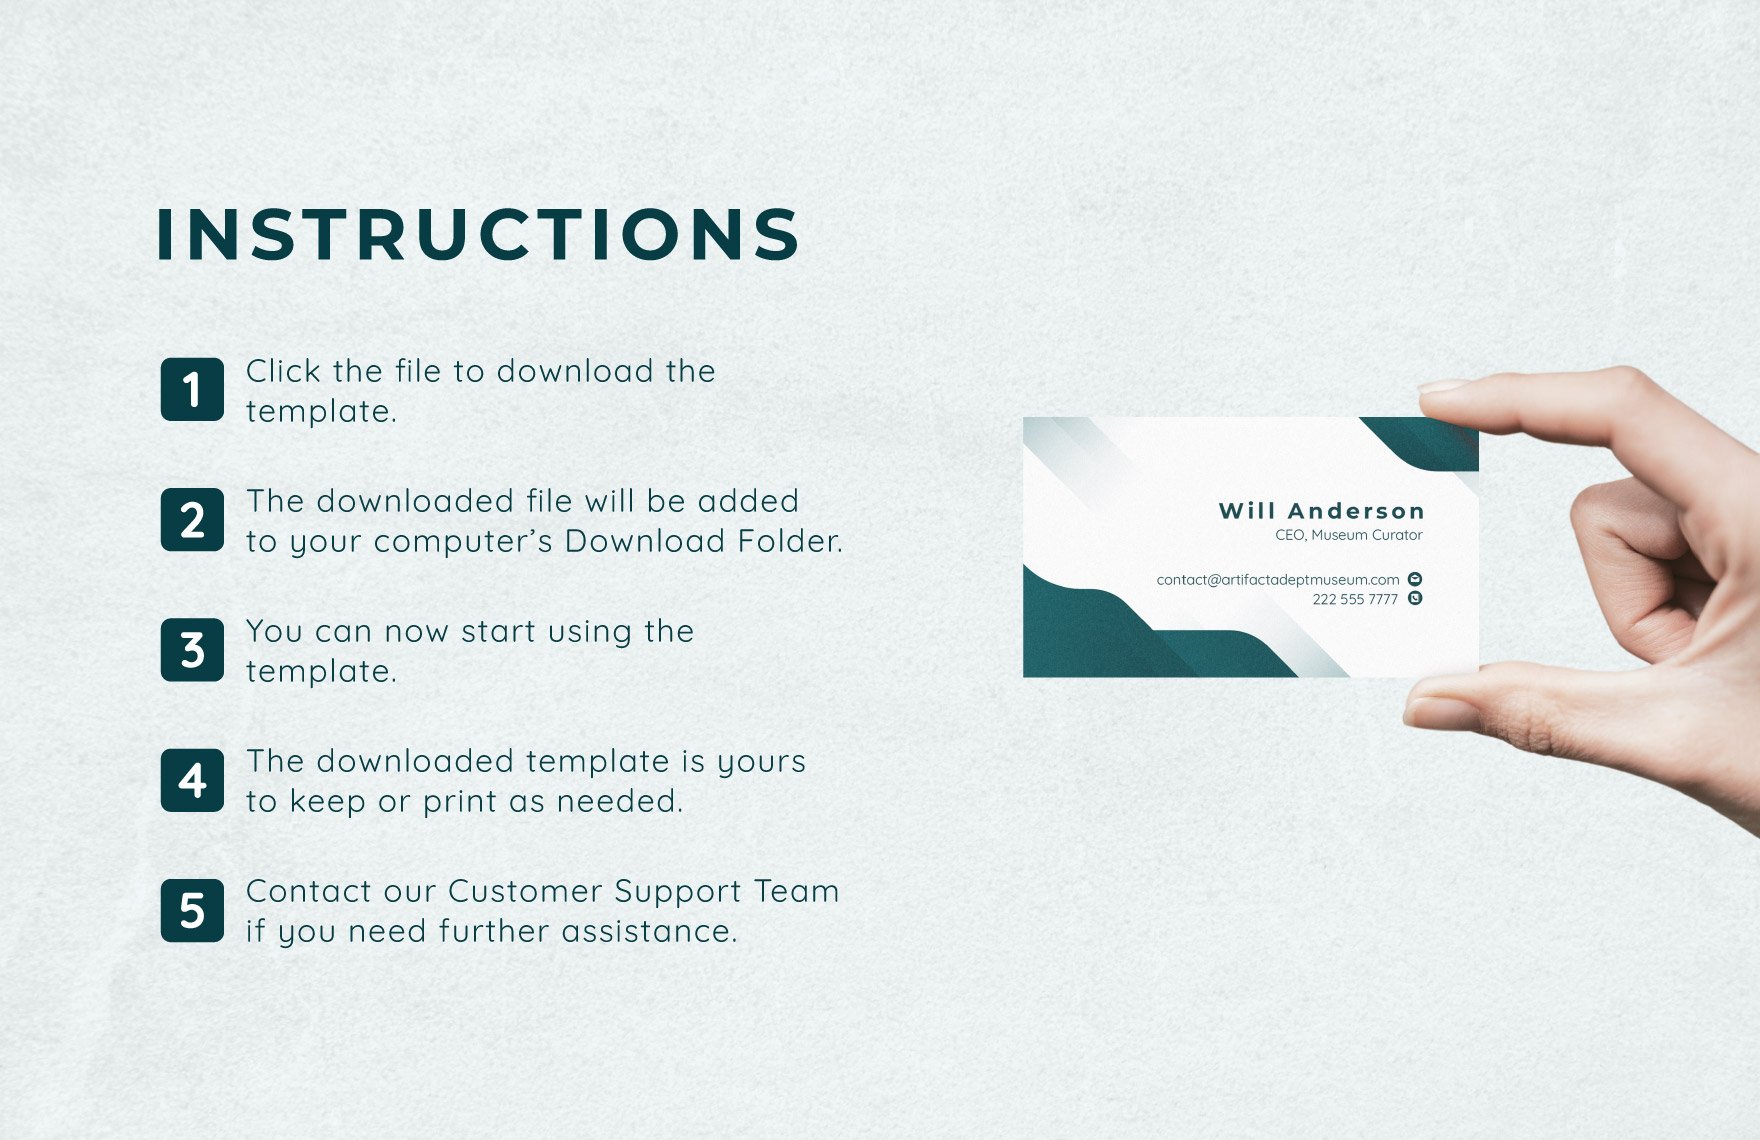 Business Card Word Template